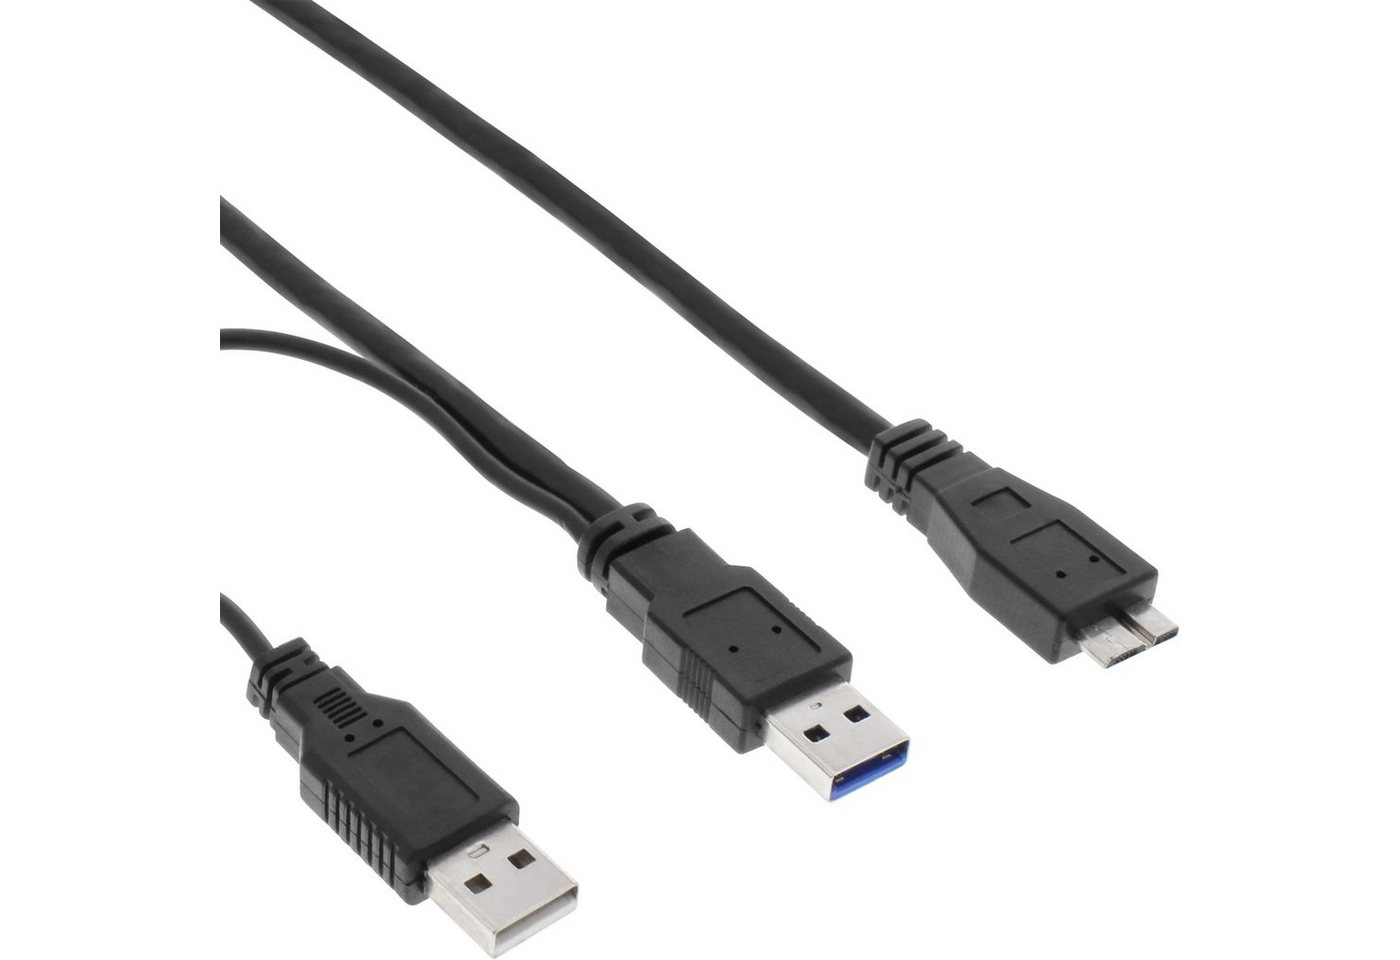 INTOS ELECTRONIC AG InLine® USB 3.0 Y-Kabel, 2x A an Micro B, schwarz, 1,5m USB-Kabel von INTOS ELECTRONIC AG